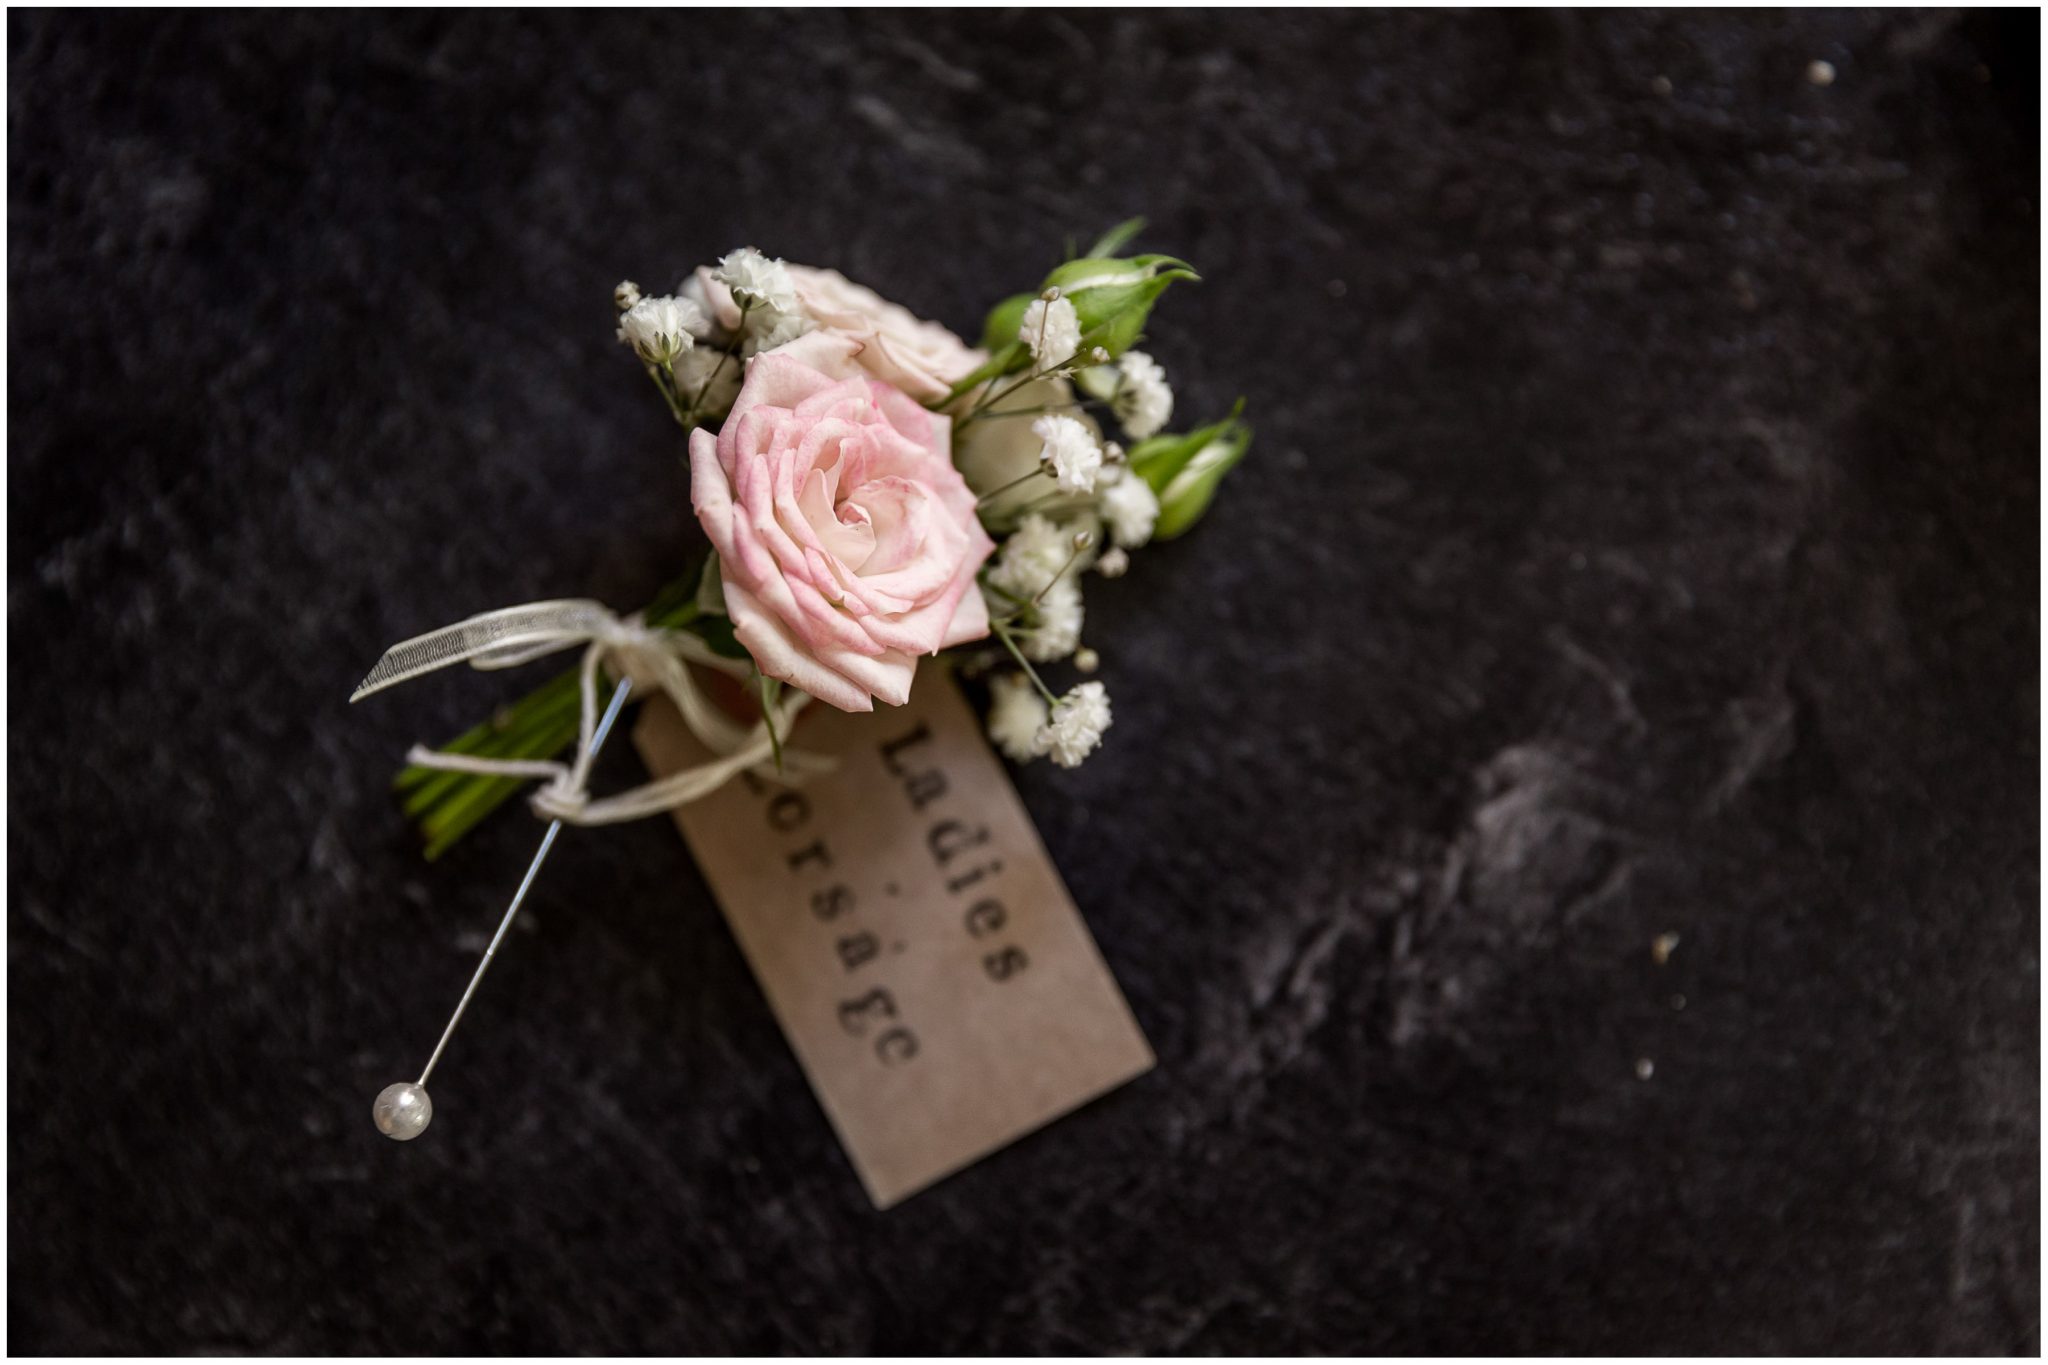 Floral detail of buttonhole for wedding outfit